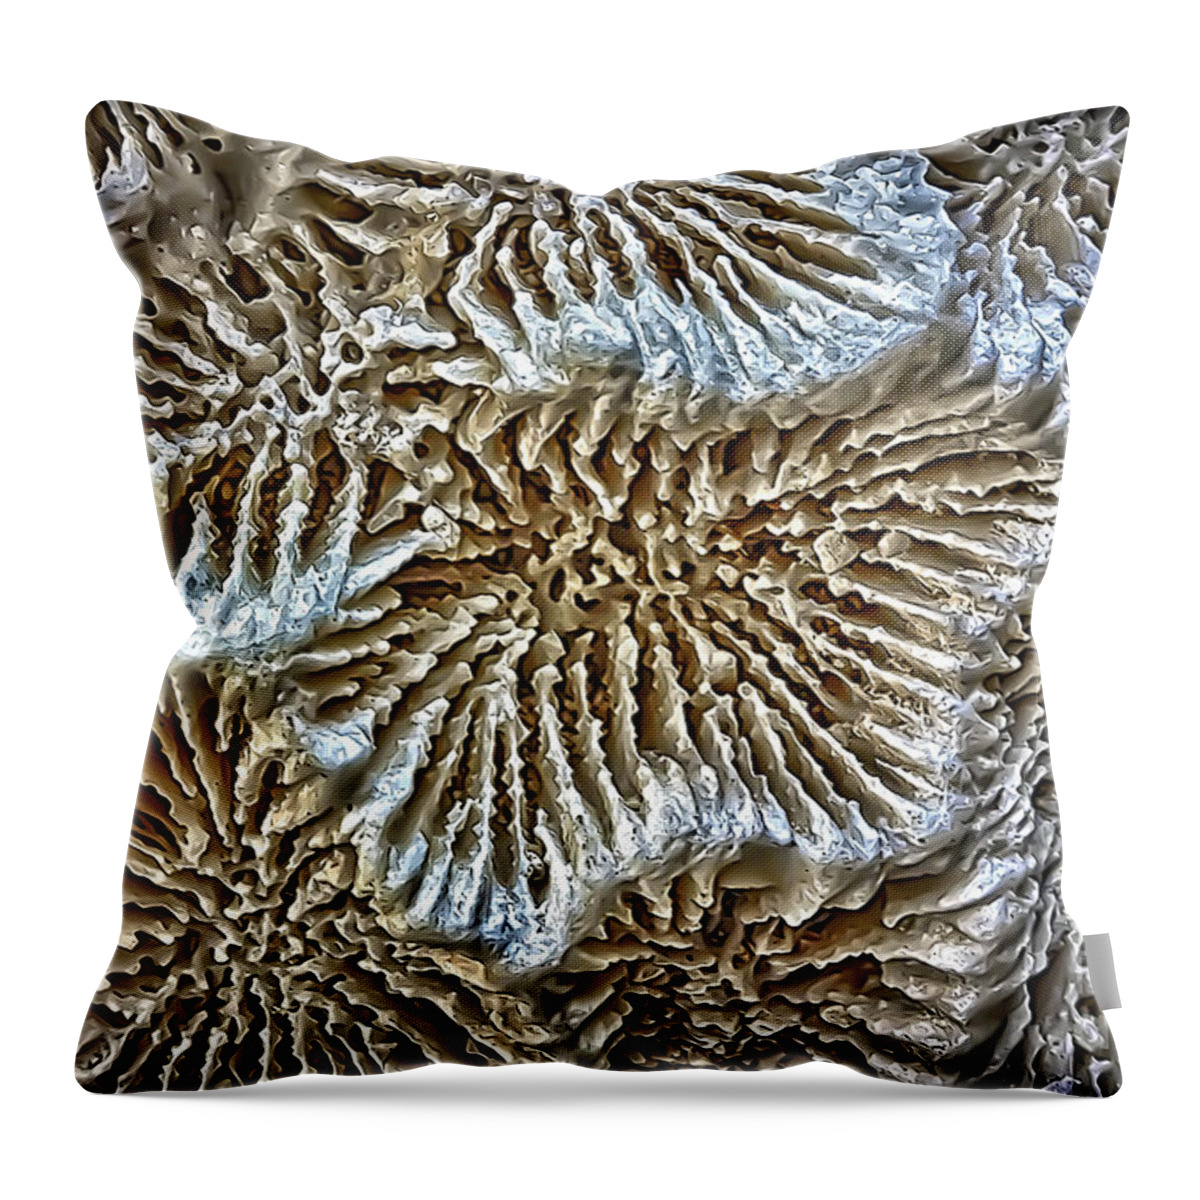 Coral Throw Pillow featuring the photograph Coral 1 by Walt Foegelle